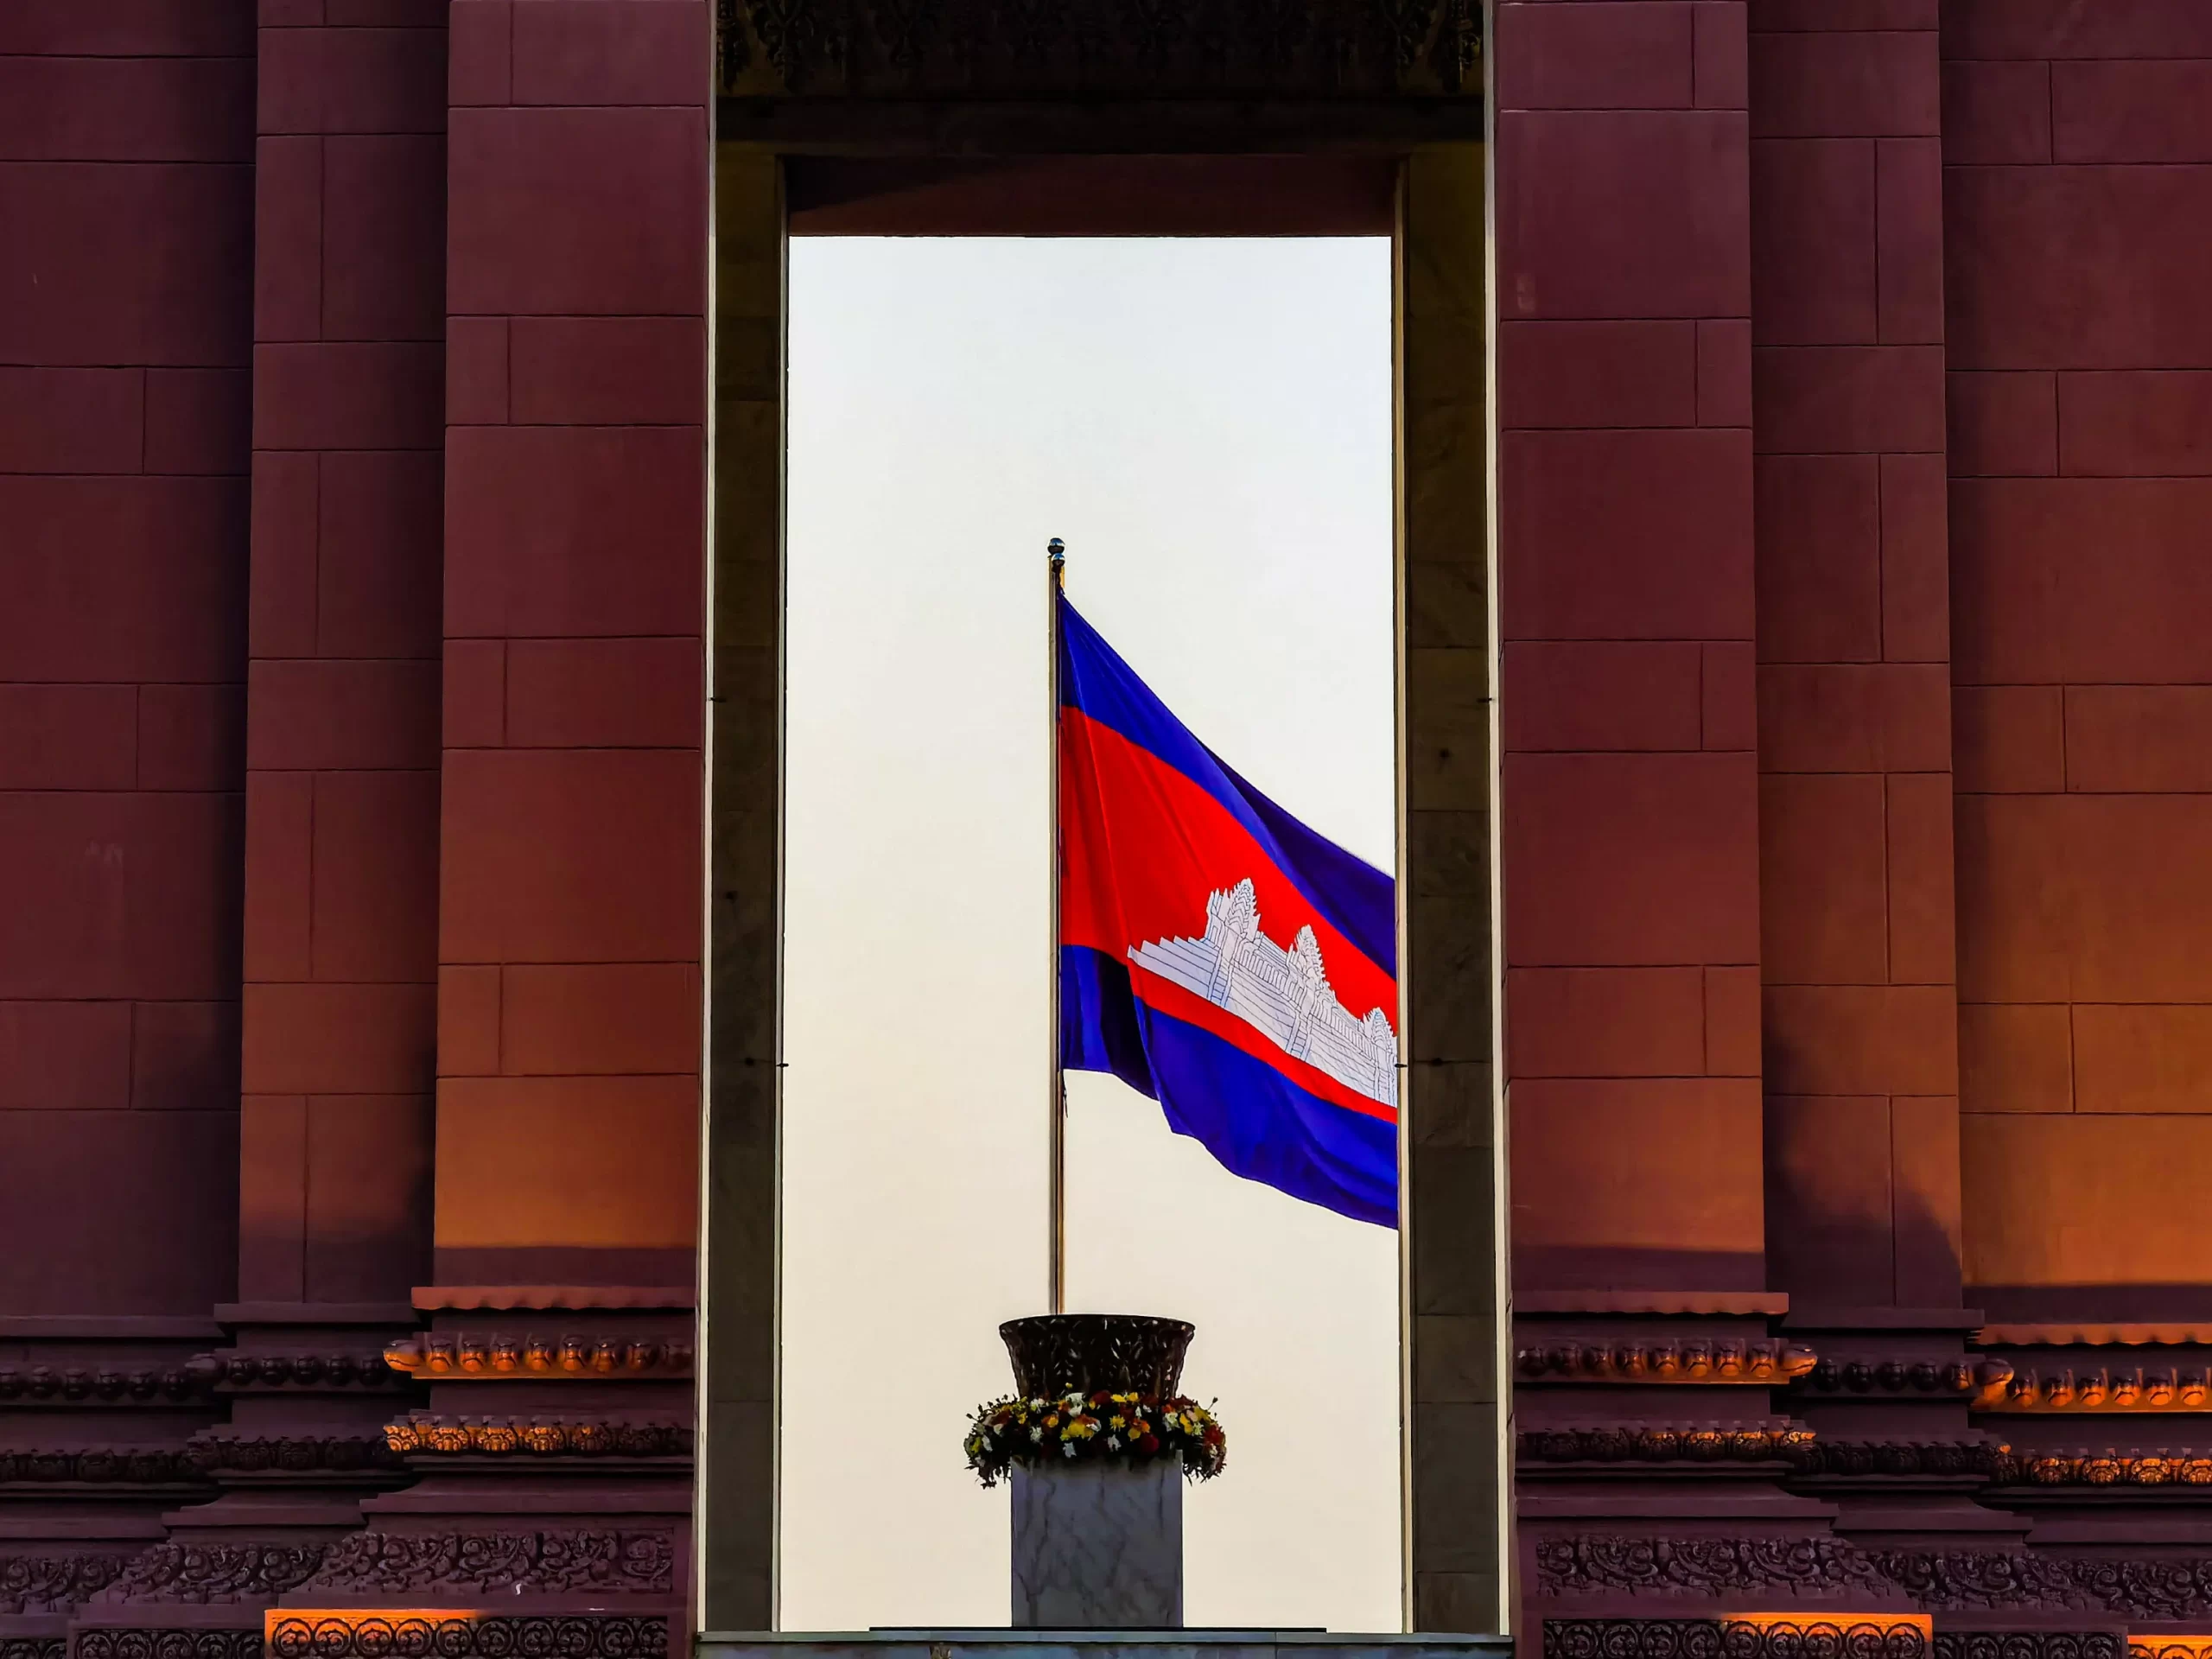 The flag of Cambodia scaled